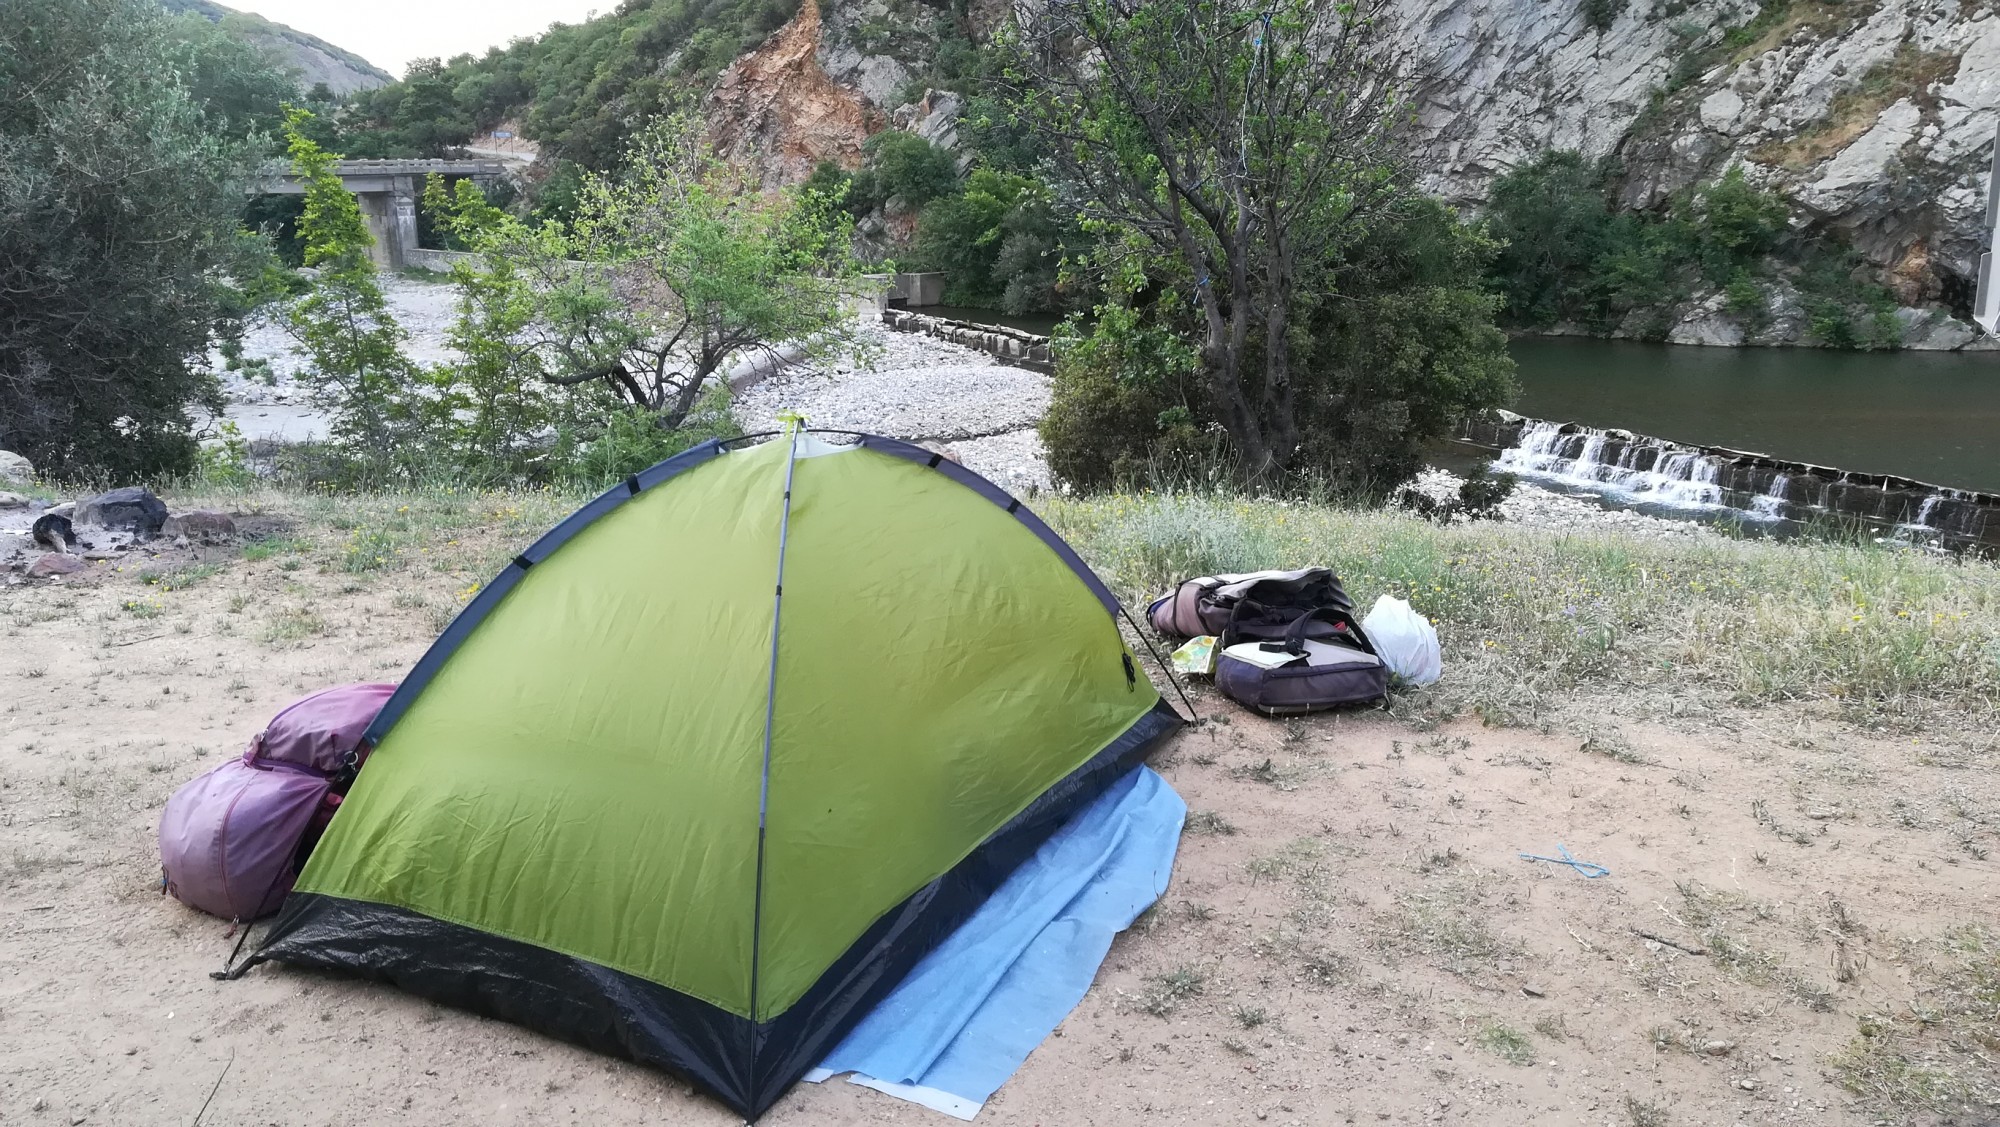 Having not showered for several days, the river basin below this campsite was a perfect bathing spot. We found an old Byzantine bridge around the bend, a few hundred meters away.